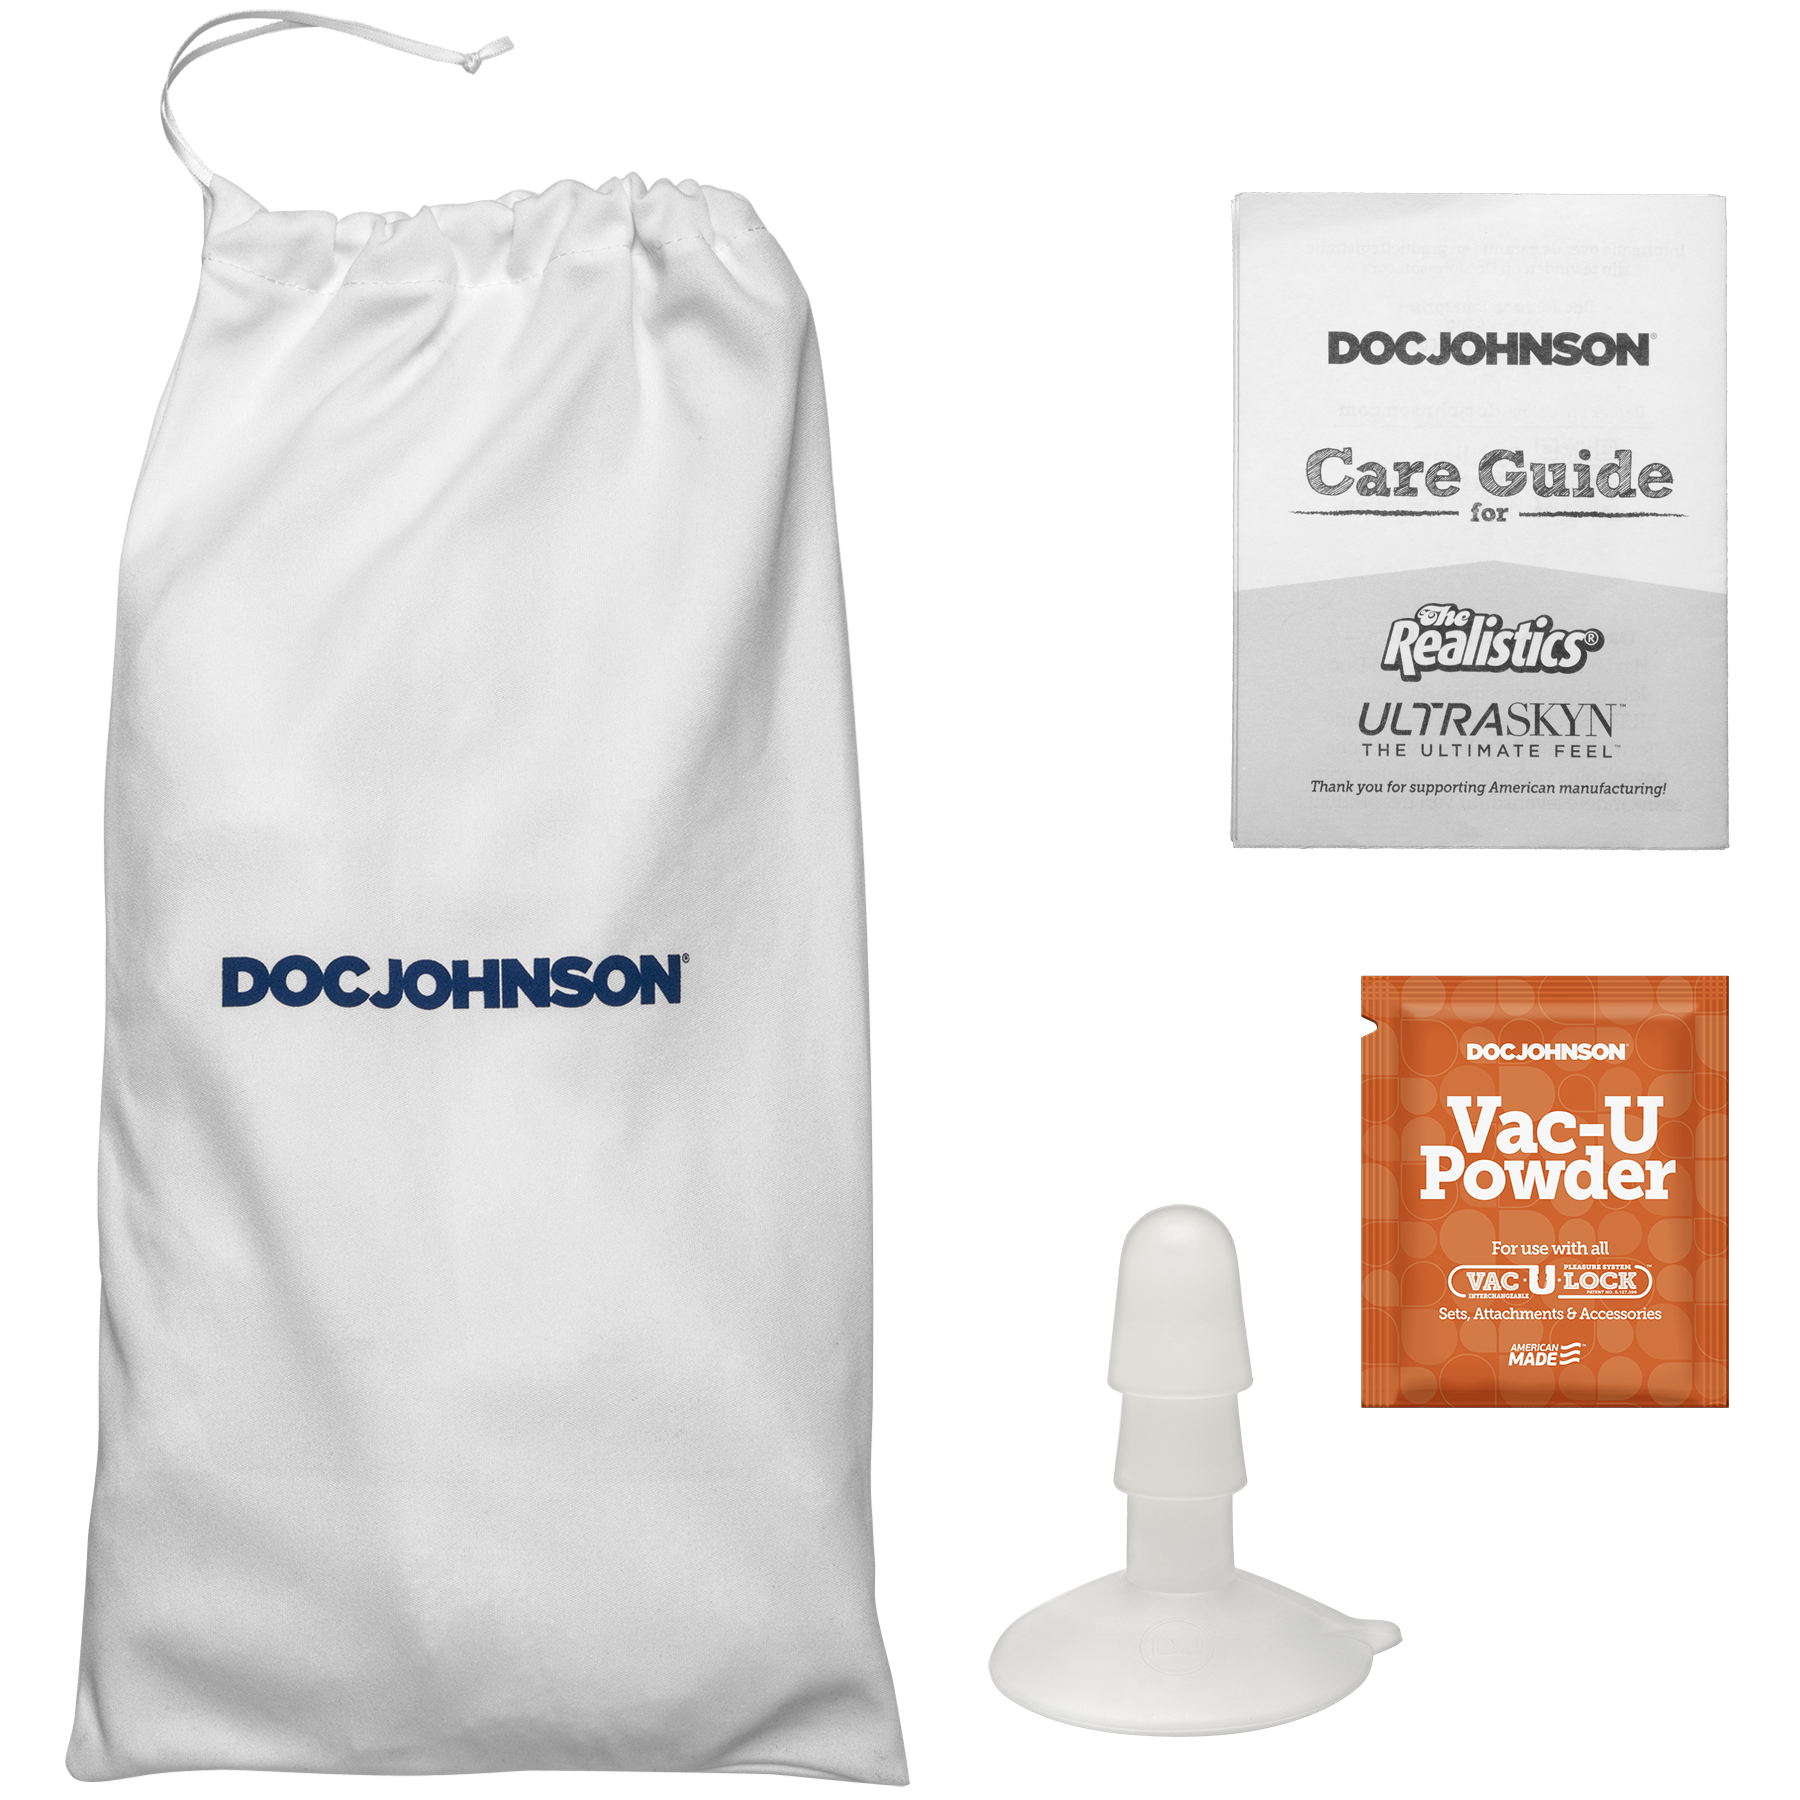 Signature Cocks - Dan Damage - 10 Inch ULTRASKYN Cock with Removable Vac-U-Lock Suction Cup